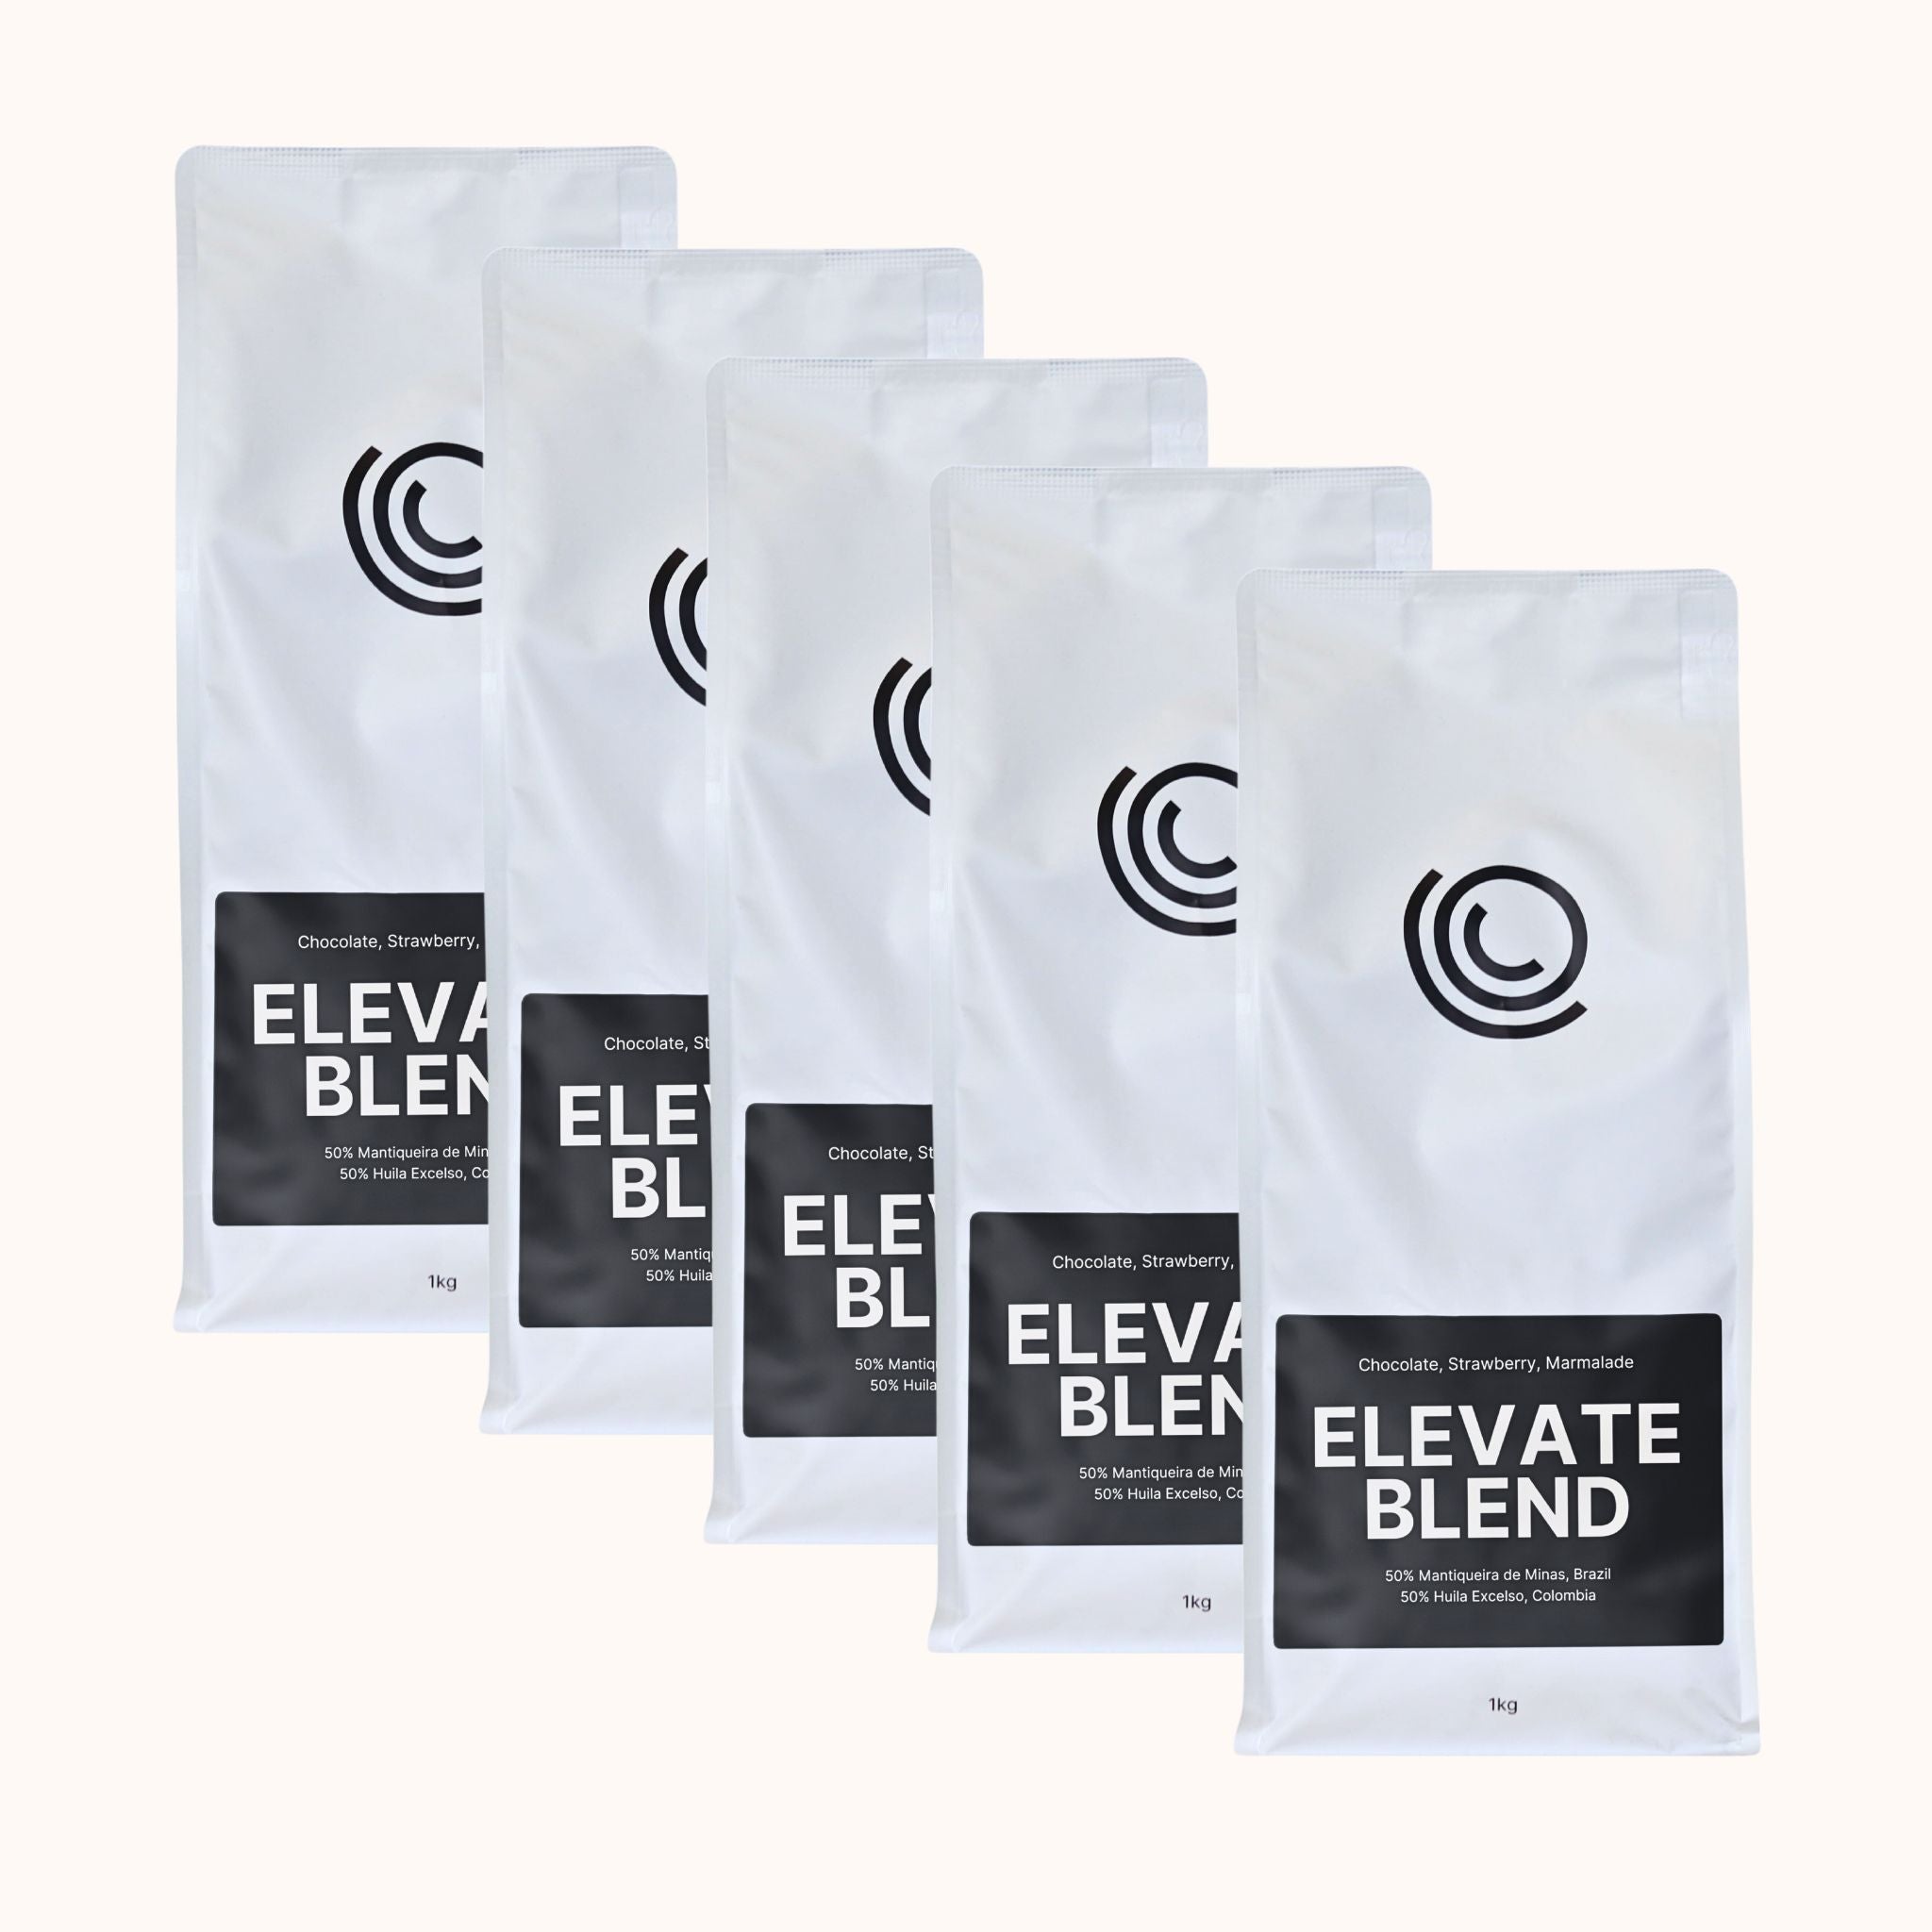 5kg Elevate Blend party pack